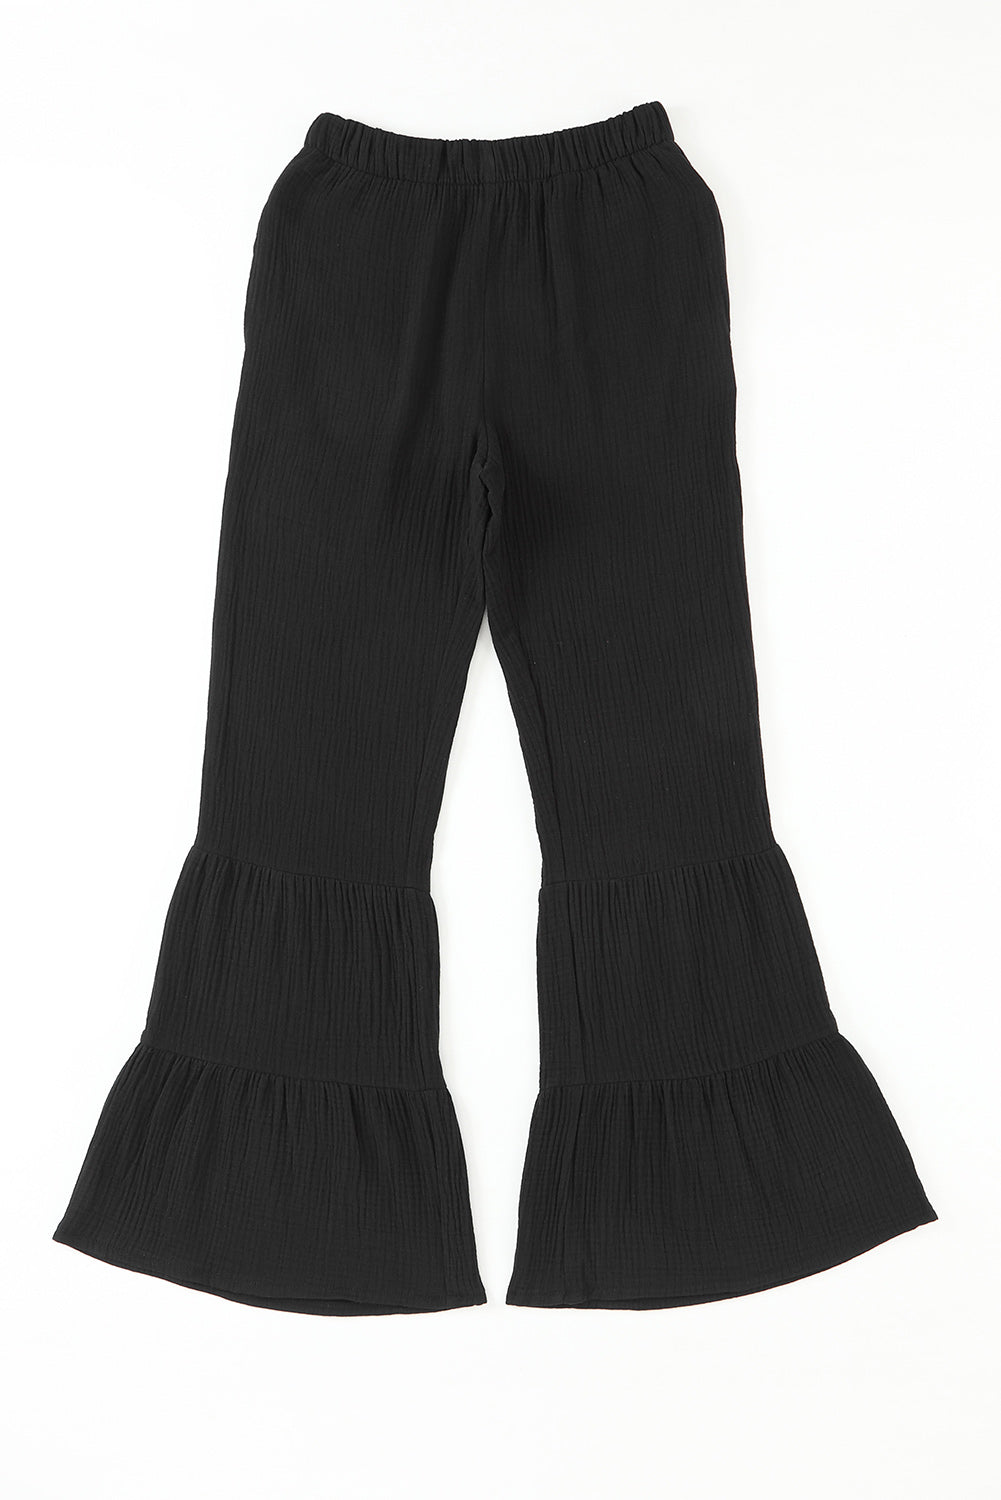 Long Flare Pants with Pocket free shipping -Oh Em Gee Boutique